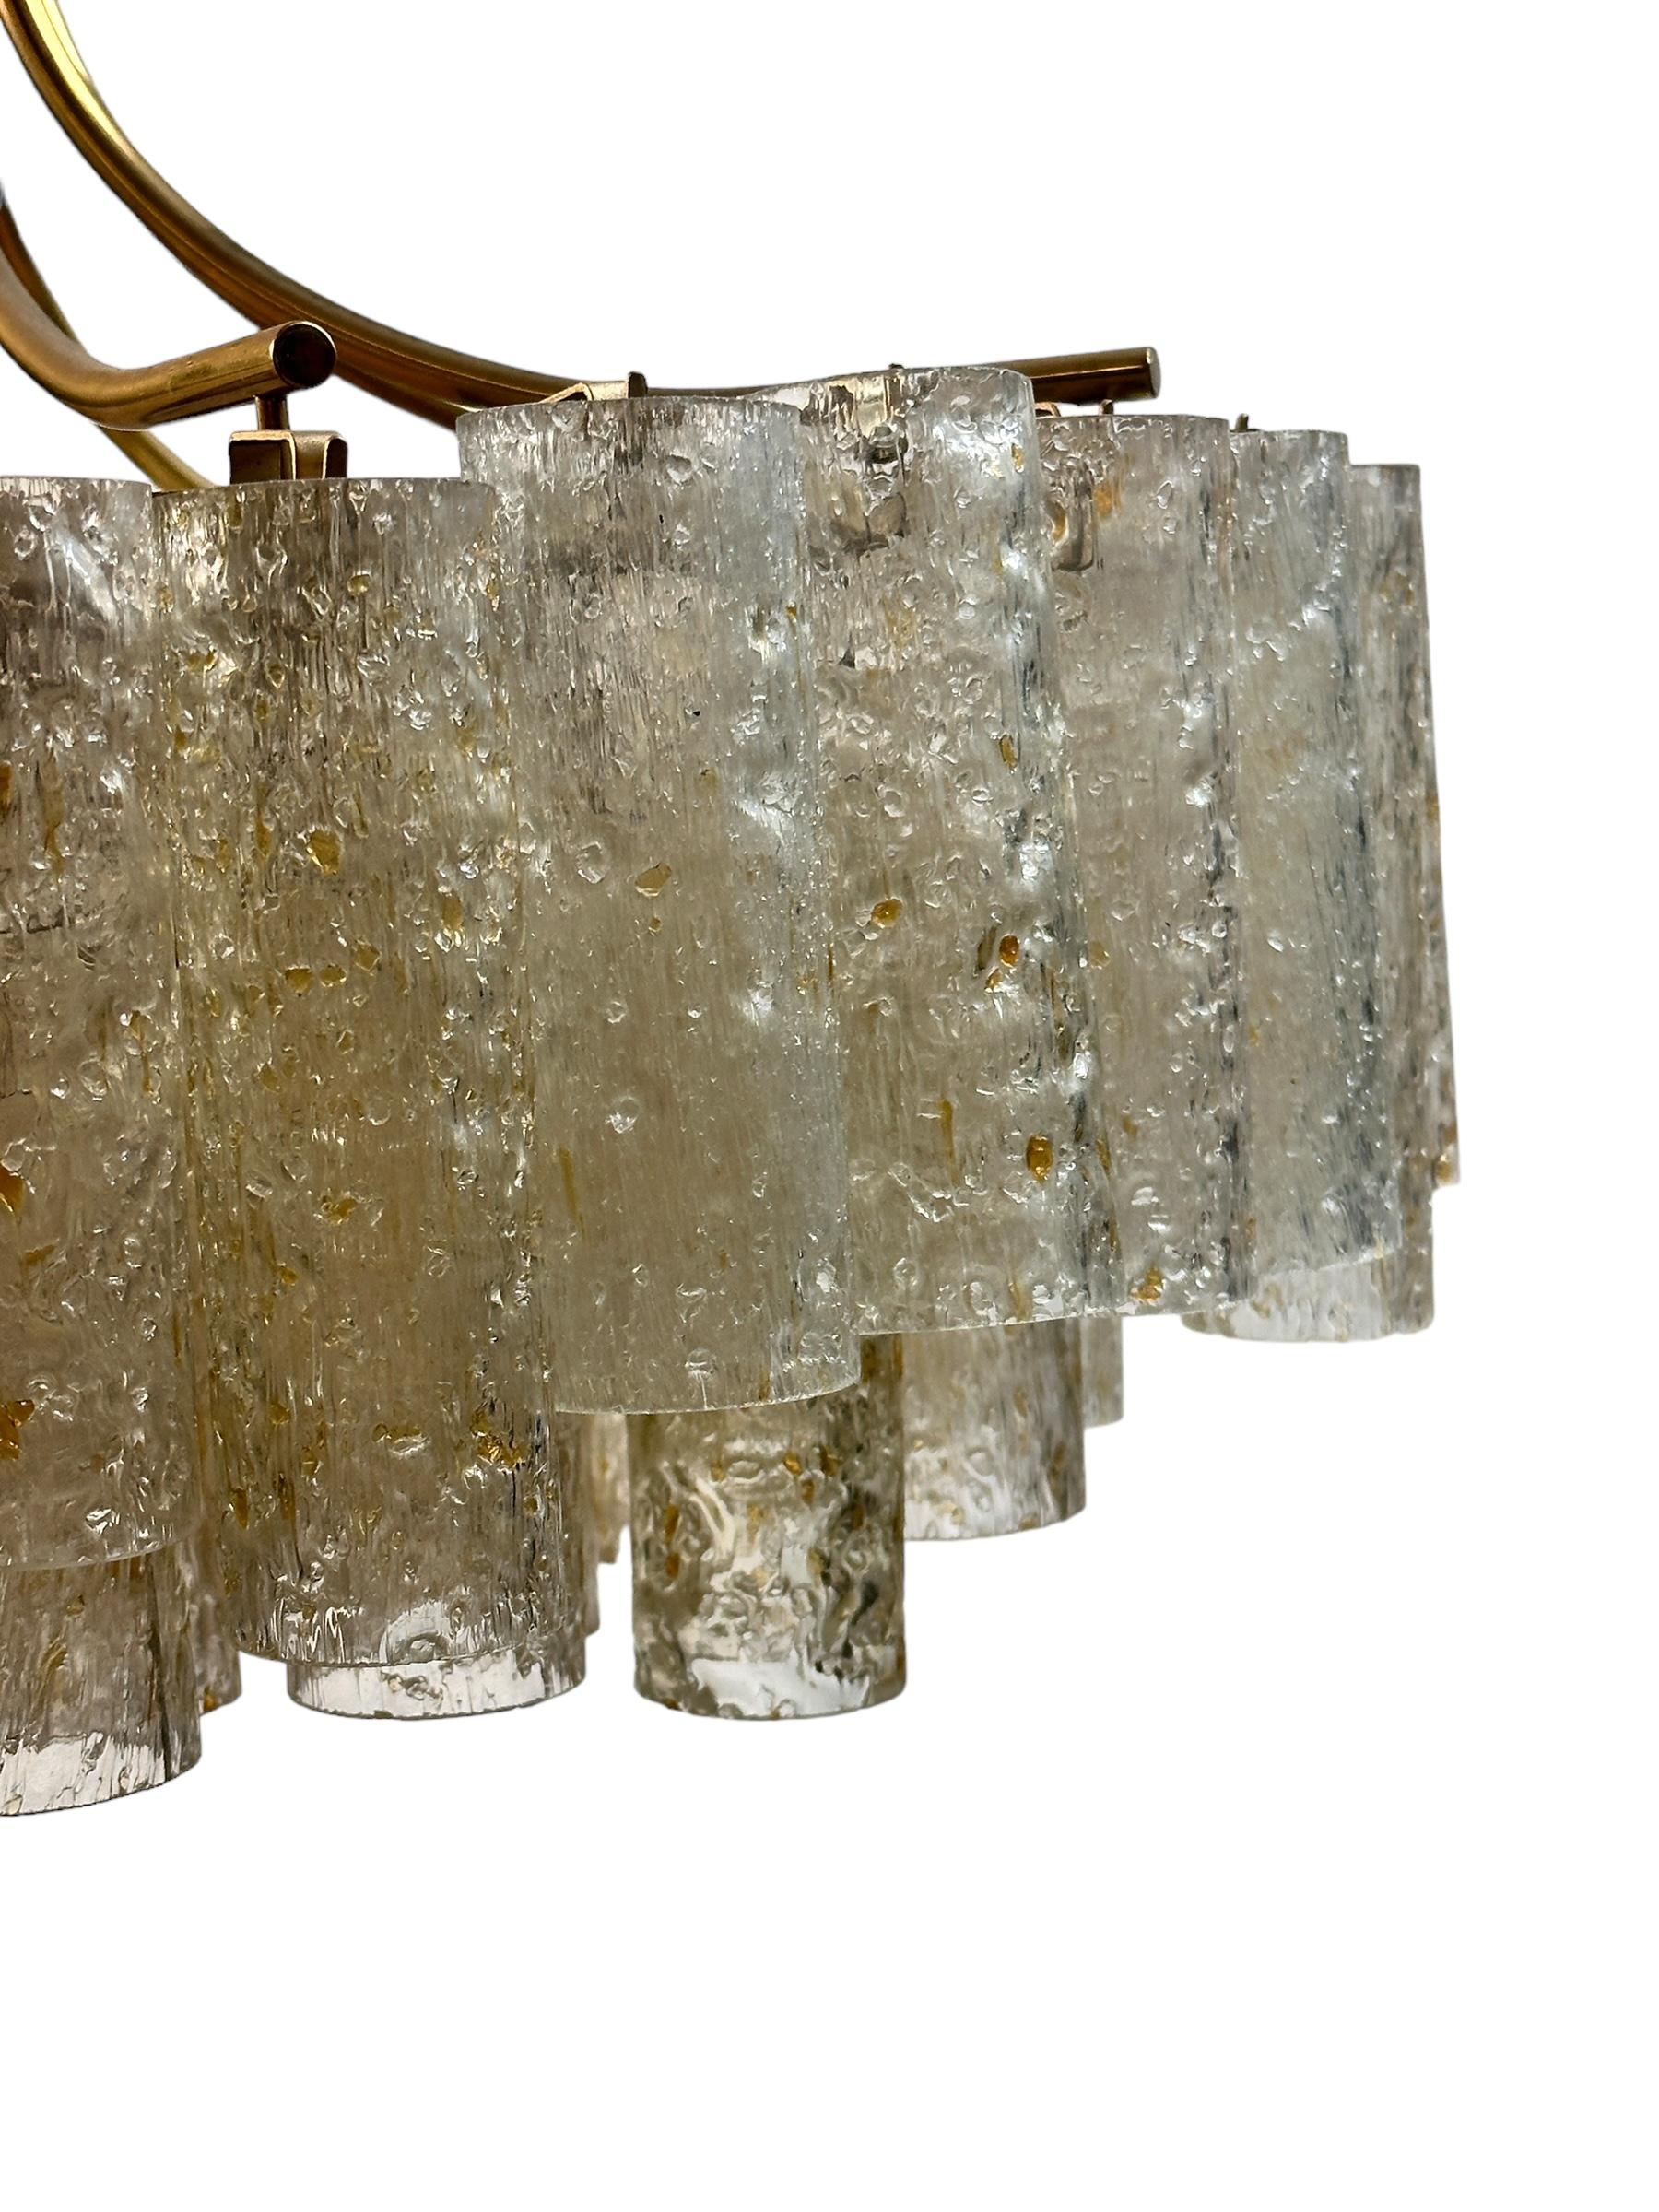 Large Five - Tier Glass Tube Chandelier by Doria Leuchten, Germany, 1960s For Sale 1